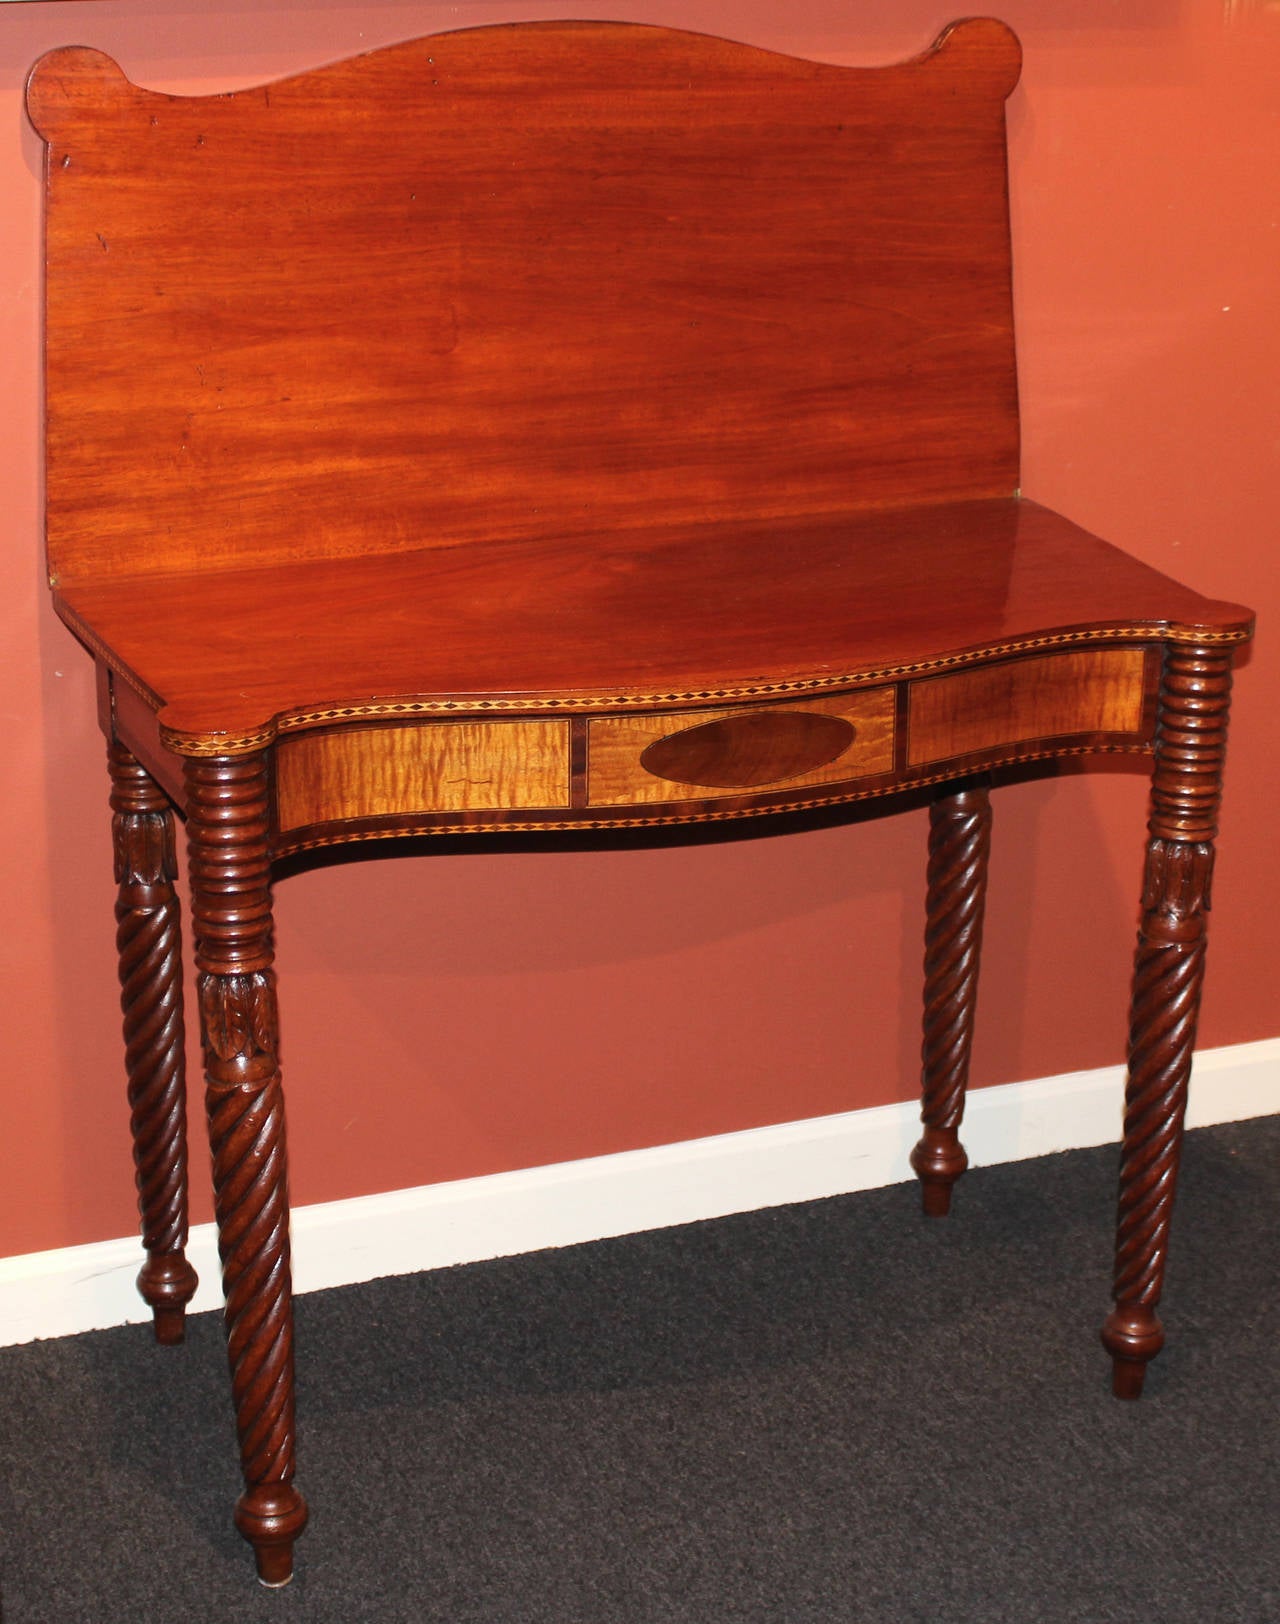 American Federal Period , Sheraton Card Table from Salem, Massachusetts